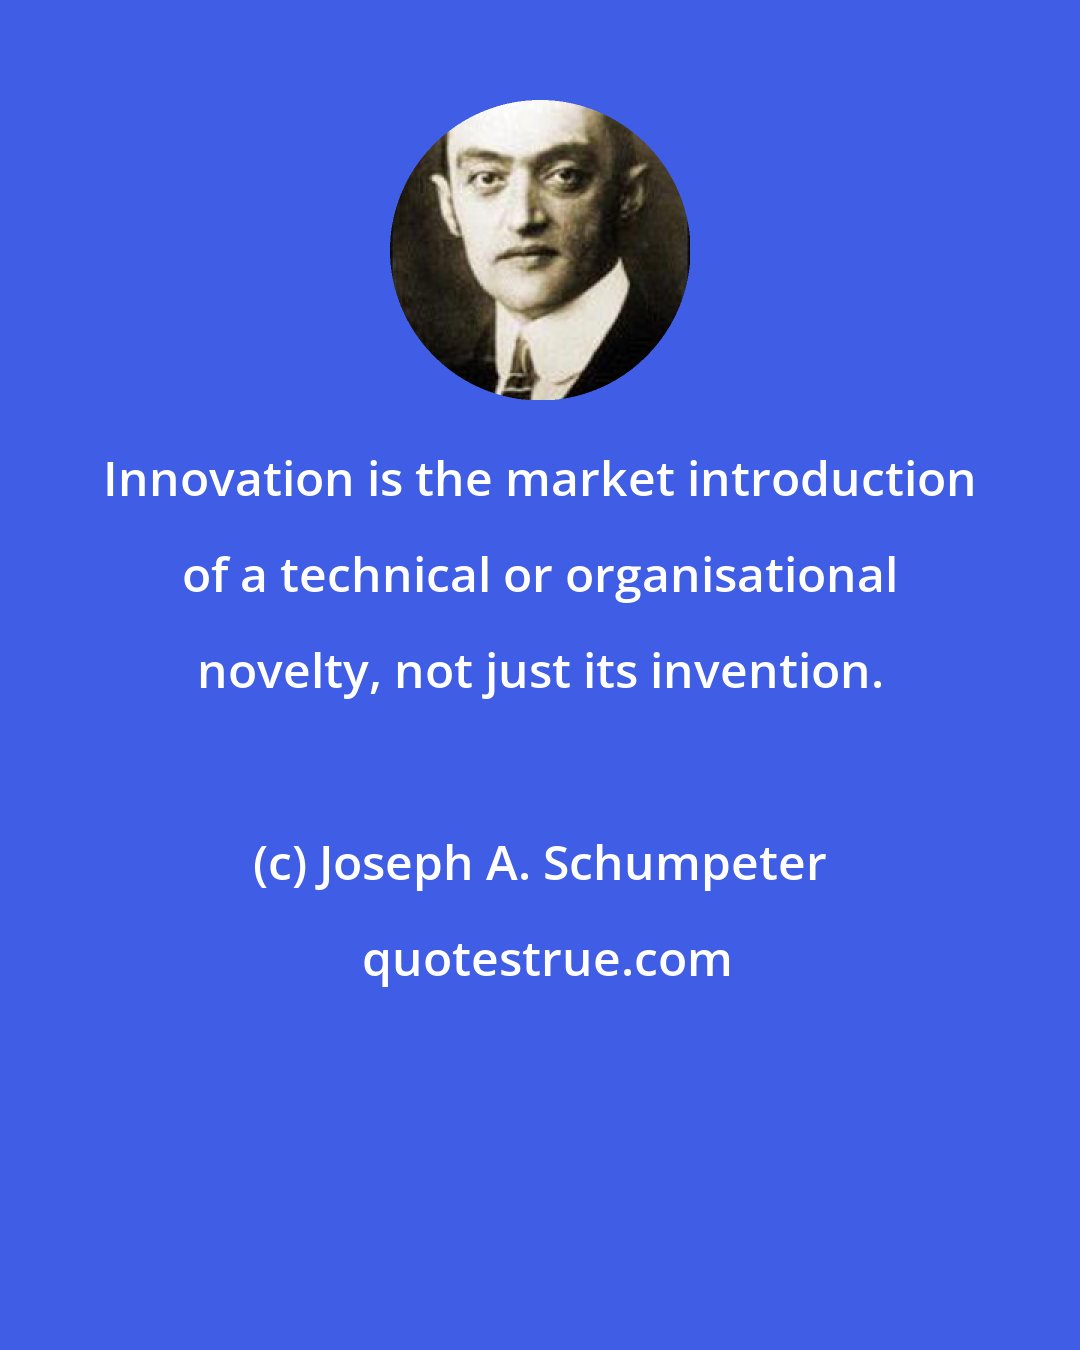 Joseph A. Schumpeter: Innovation is the market introduction of a technical or organisational novelty, not just its invention.